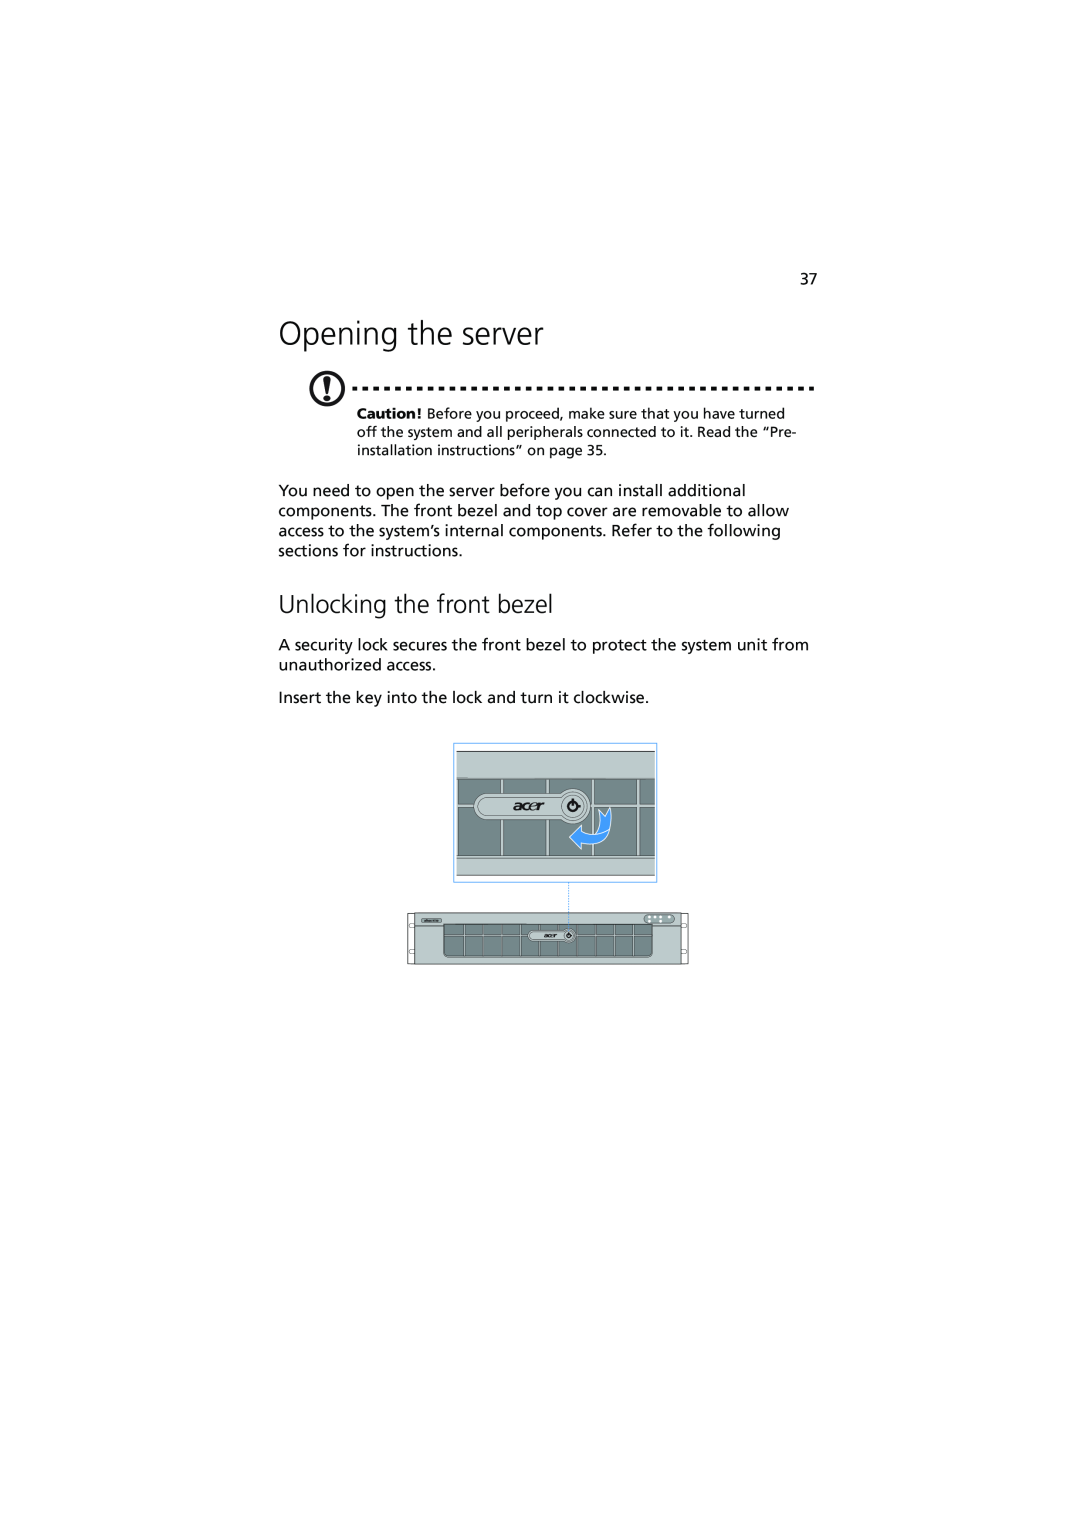 Acer R720 Series manual Opening the server, Unlocking the front bezel 